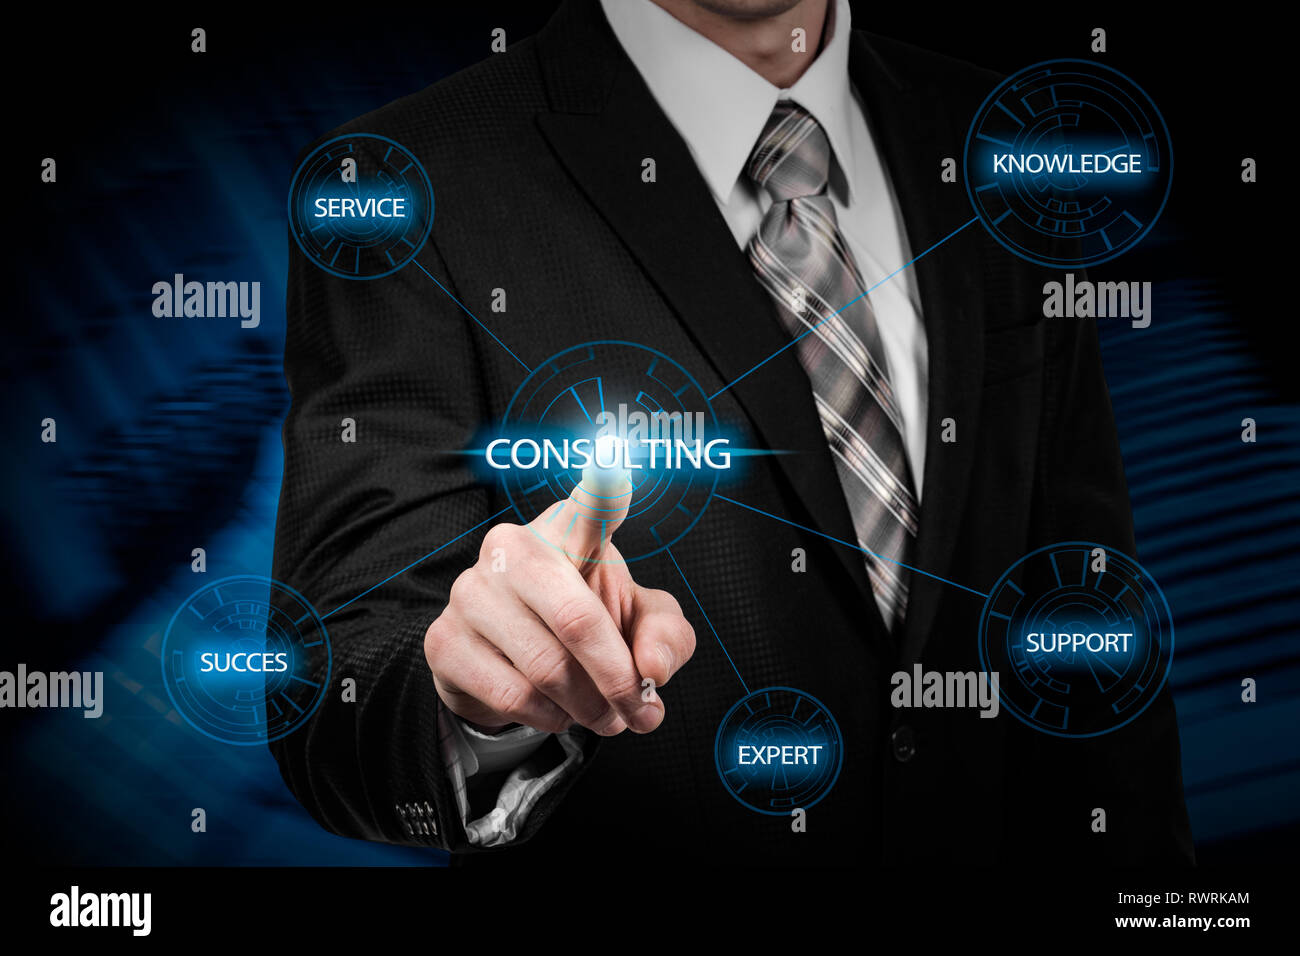 Expert Advice Consulting Service Business concept. Stock Photo